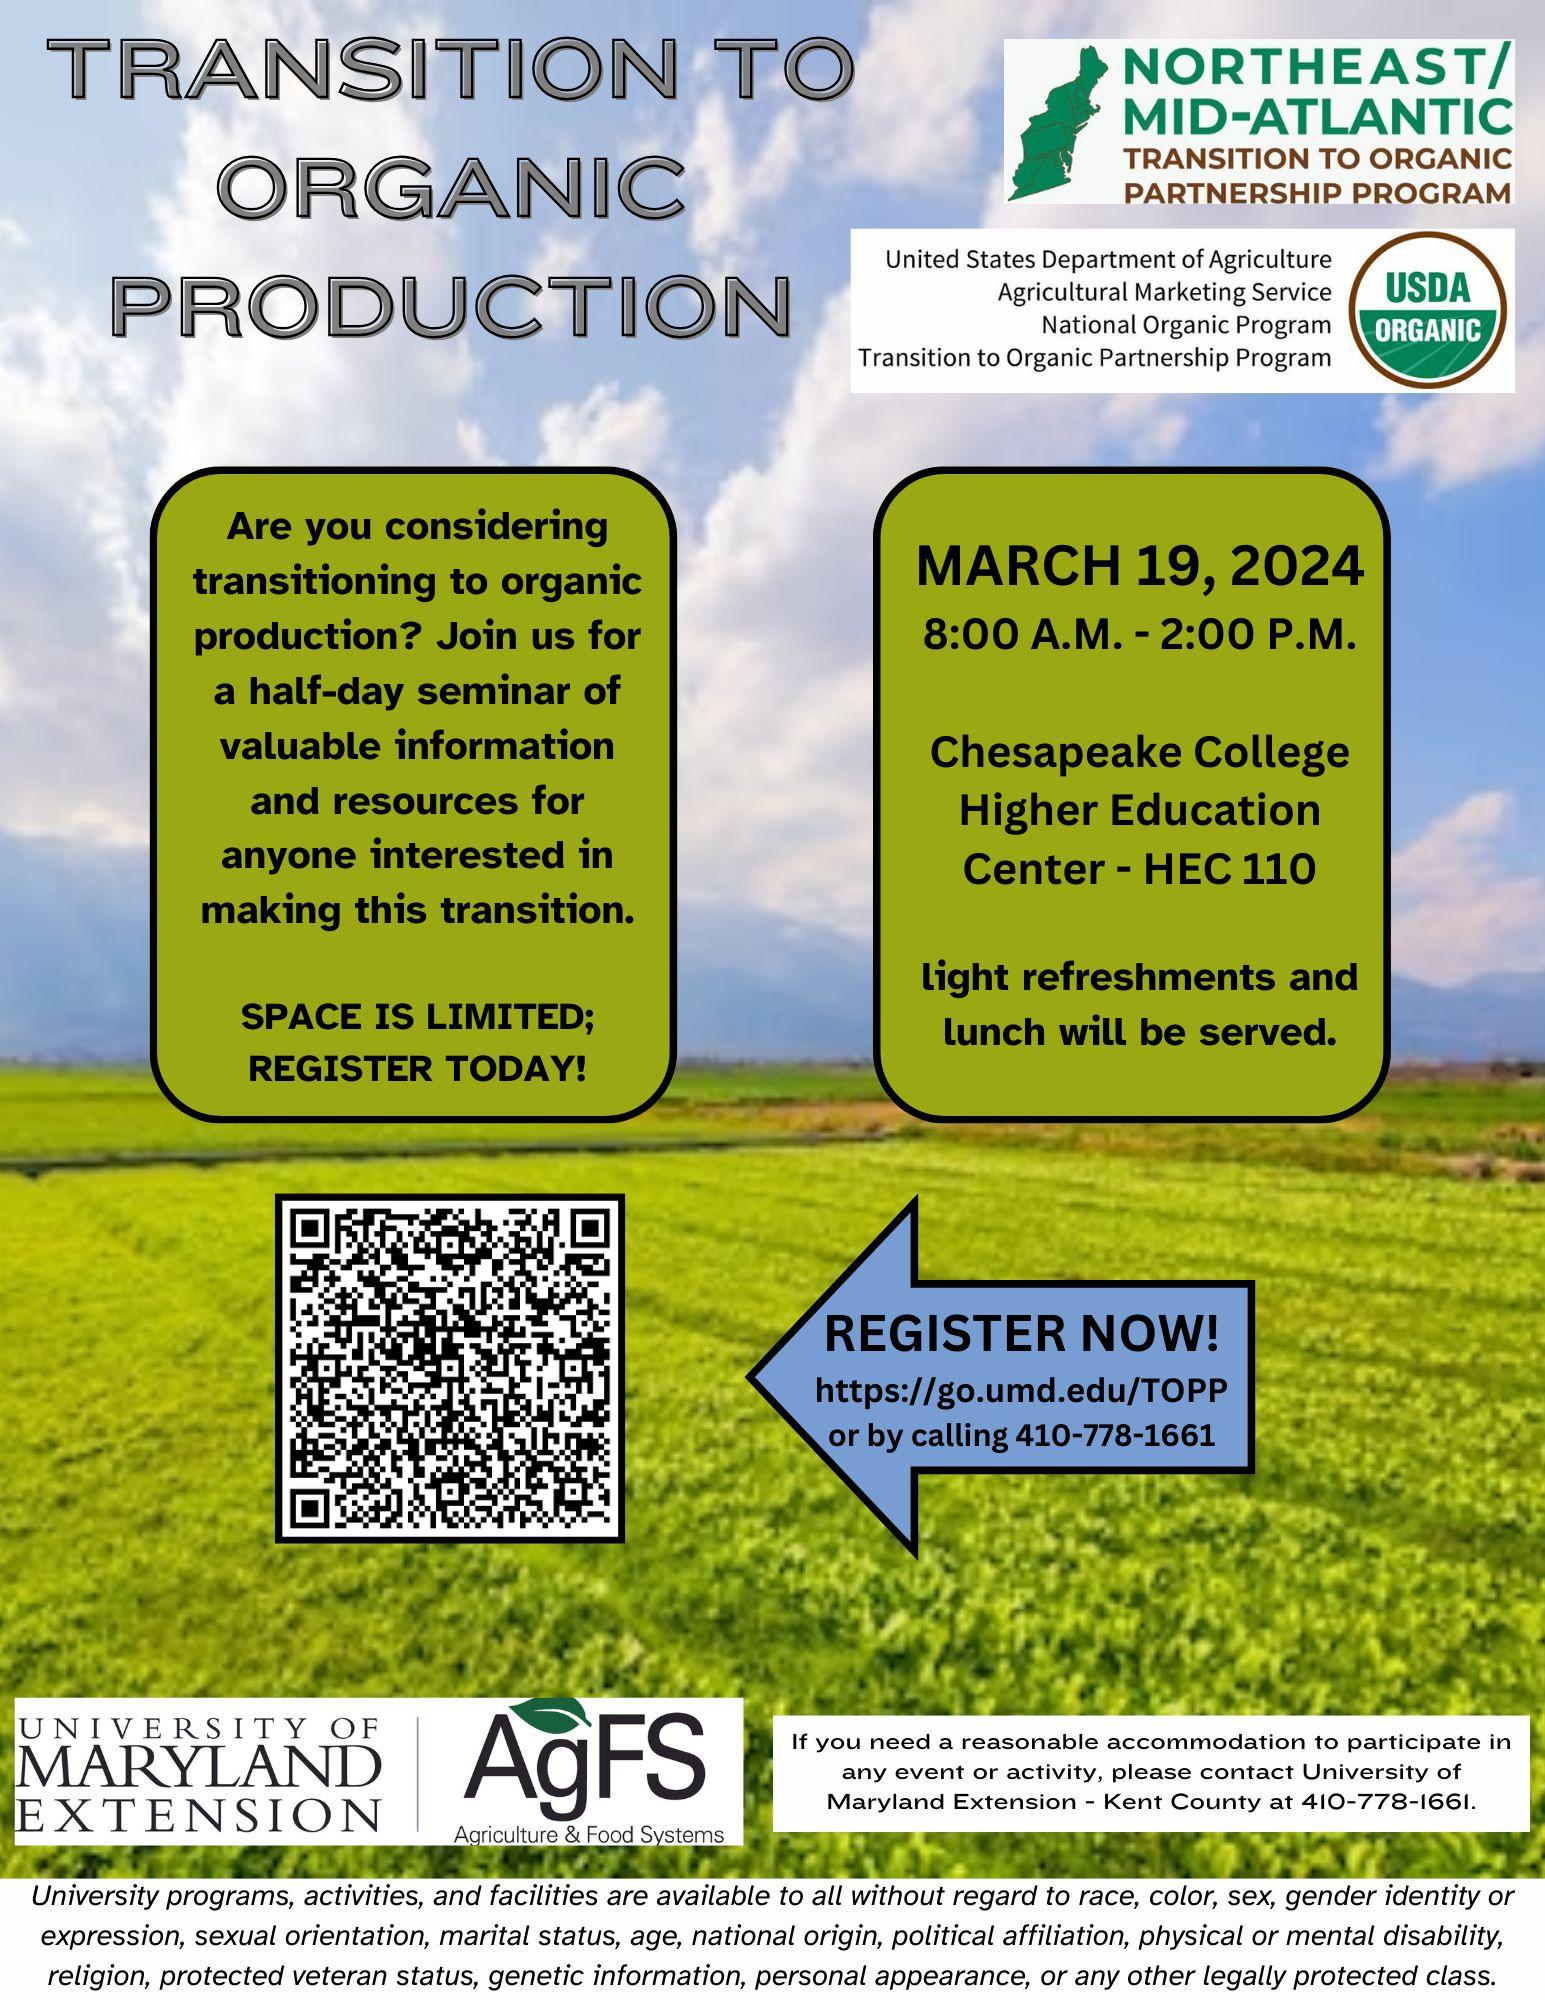 Transition to Organic Production Event on March 19, 2024